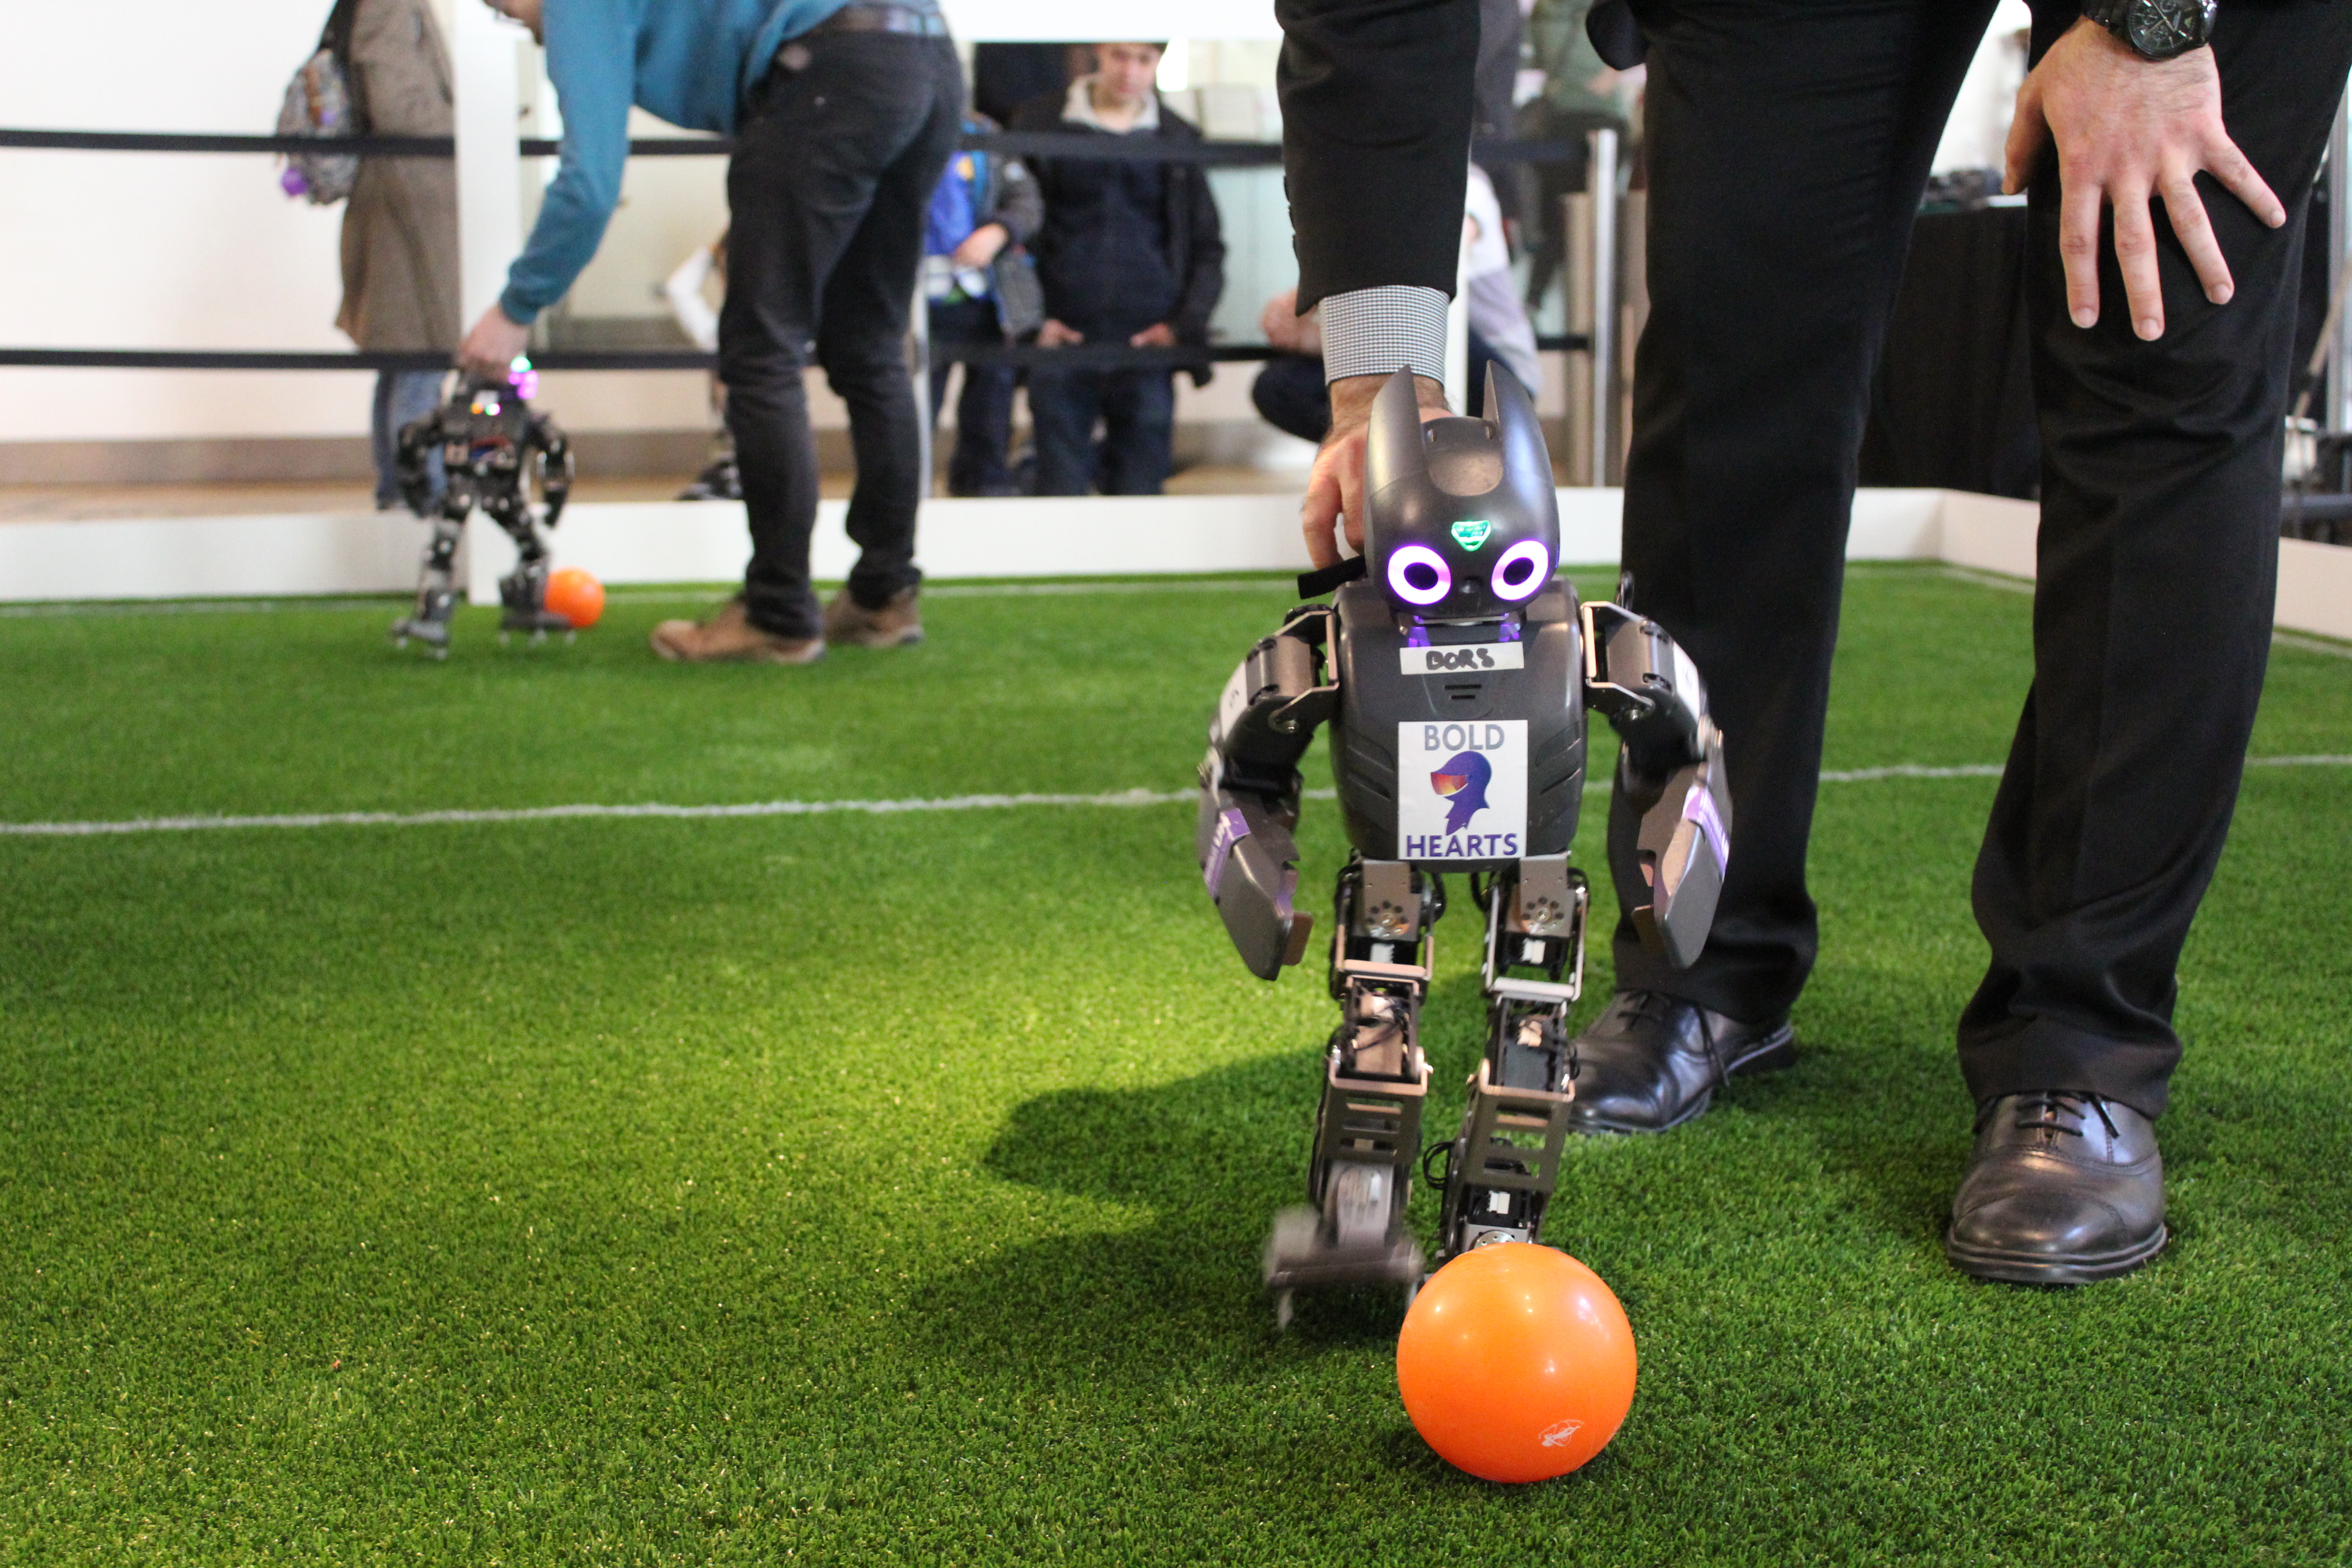 One of the University of Hertfordshire's Bold Hearts robot football team